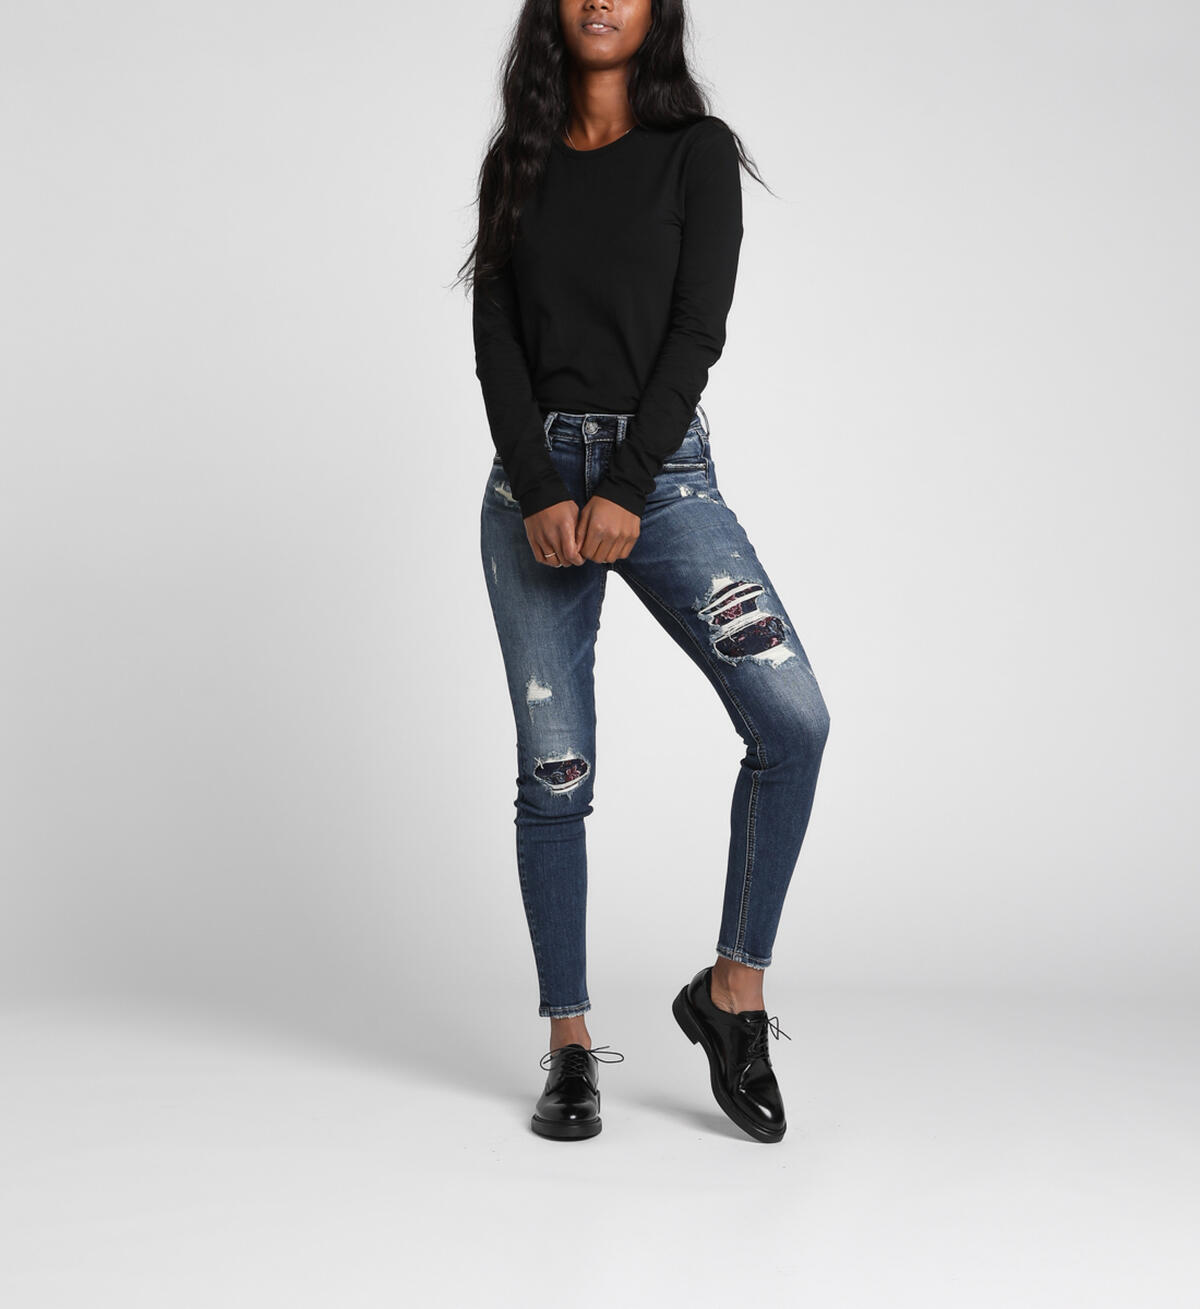 Avery High Rise Skinny Leg Jeans Final Sale, , hi-res image number 3